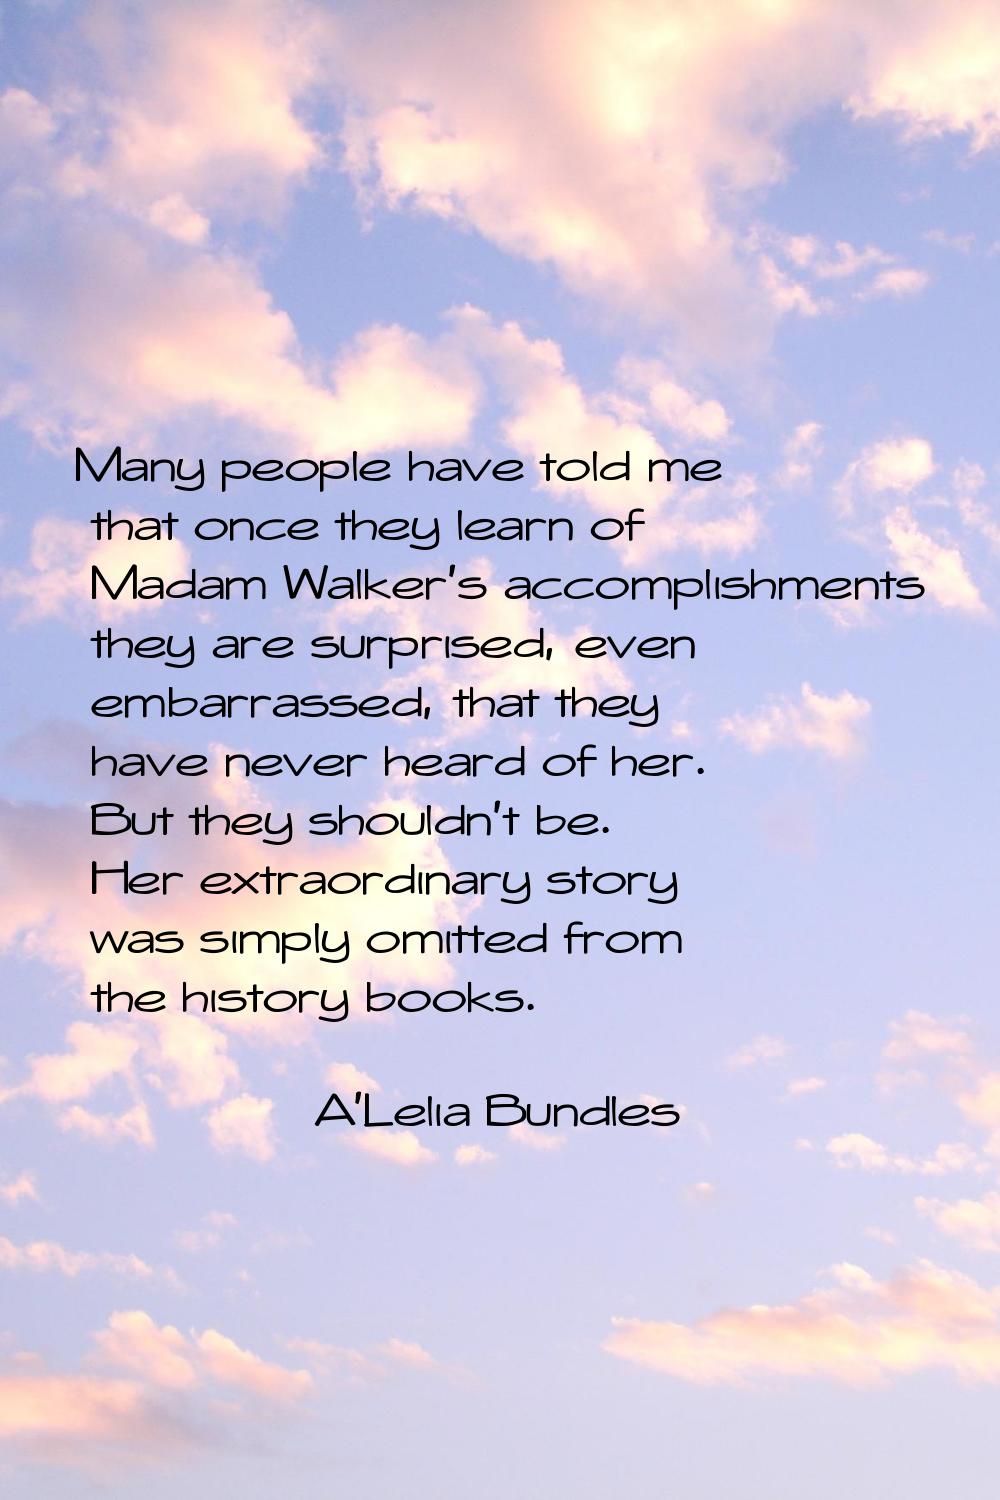 Many people have told me that once they learn of Madam Walker's accomplishments they are surprised,